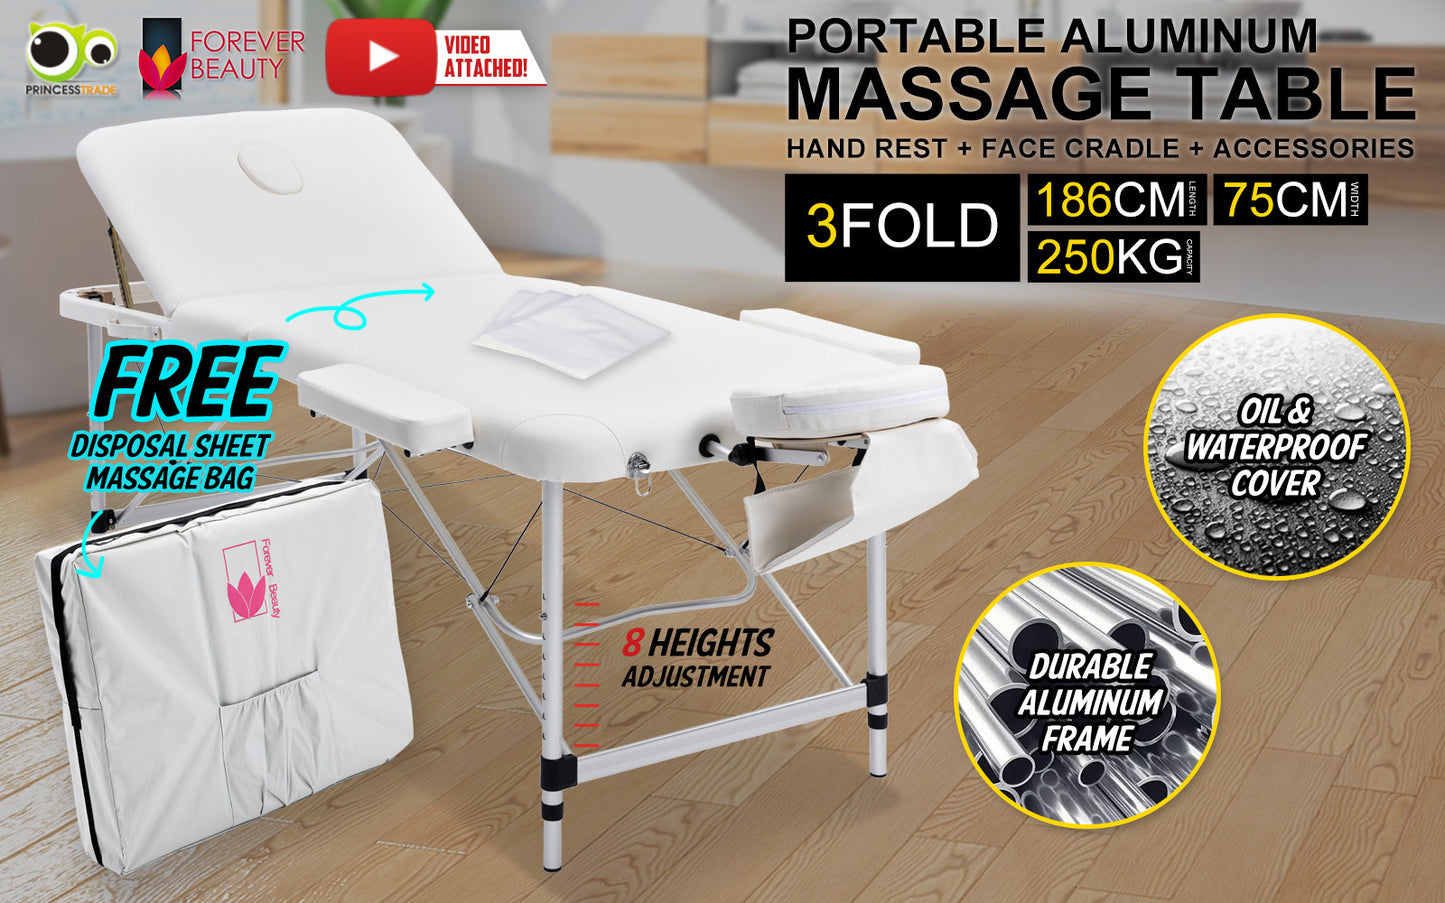 White Portable Beauty Massage Table Bed Therapy Waxing 3 Fold 75cm Aluminium - image2